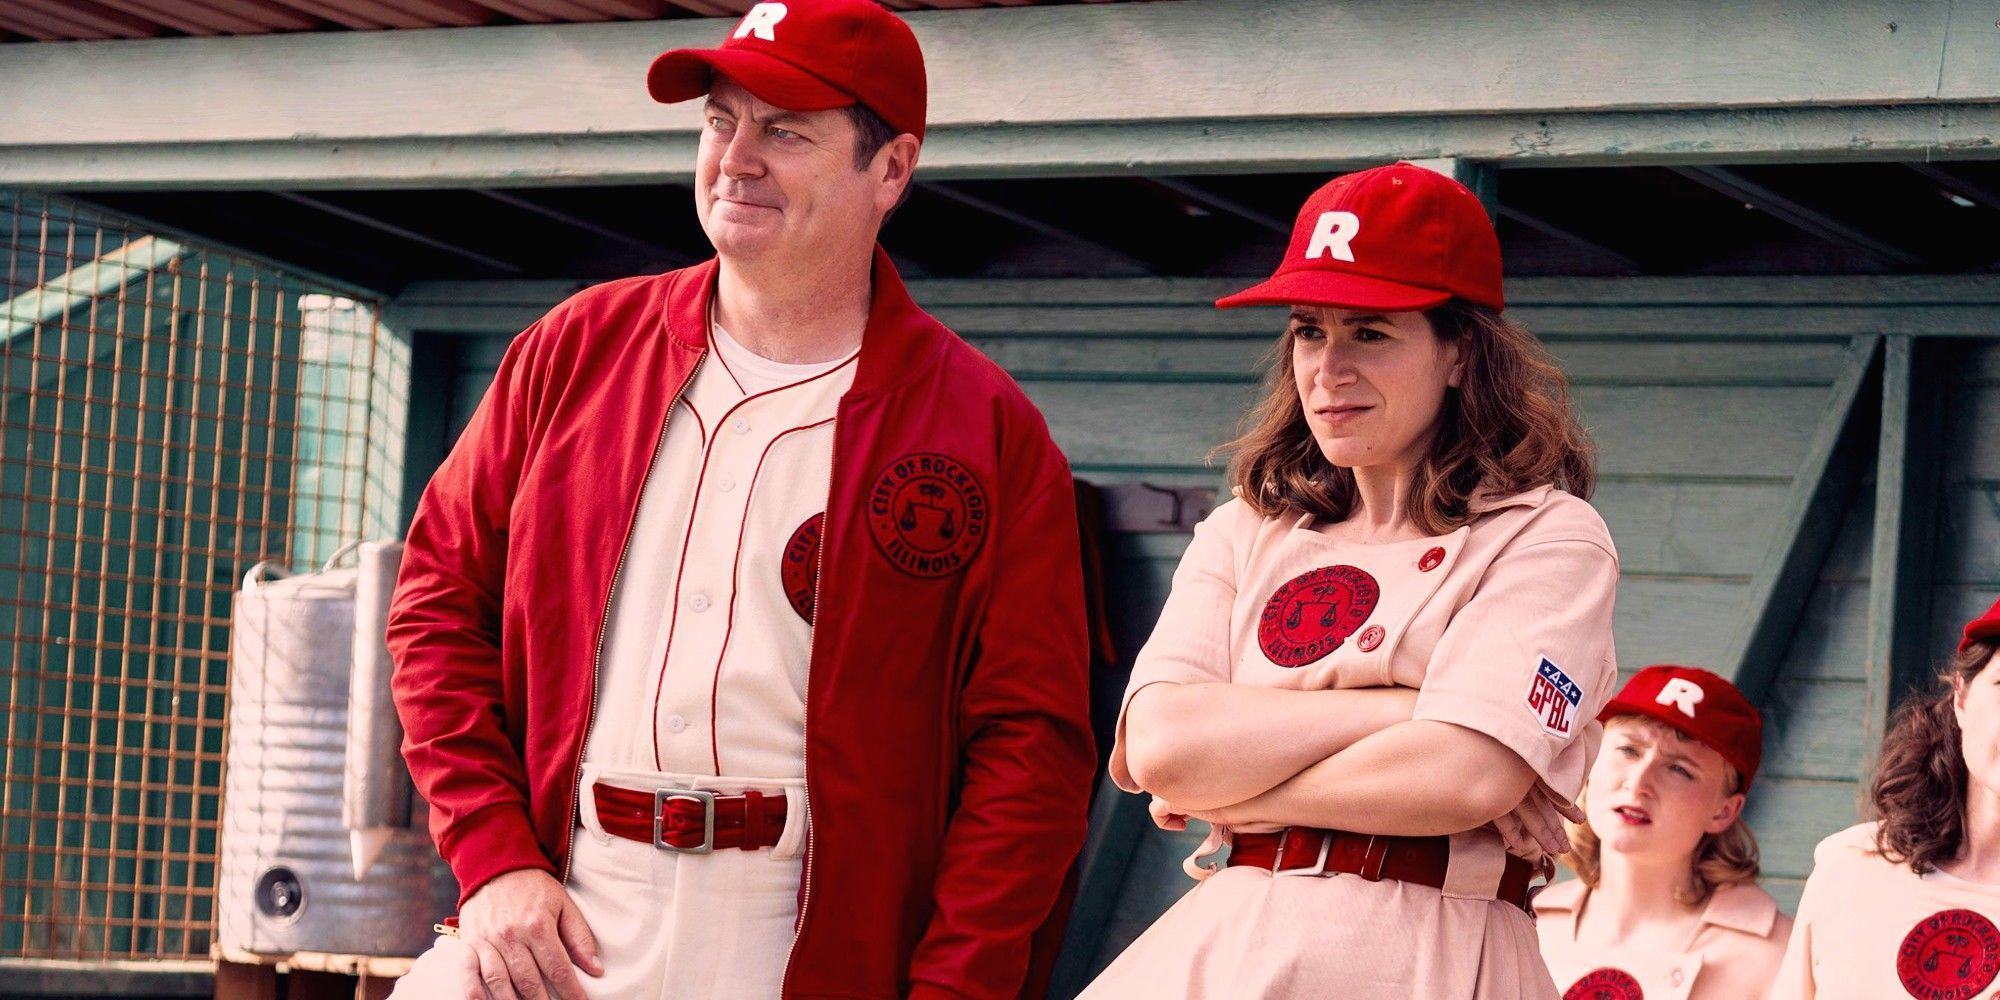 Nick Offerman and Abbi Jacobson dressing in baseball uniforms standing in a dugout on A League of Their Own